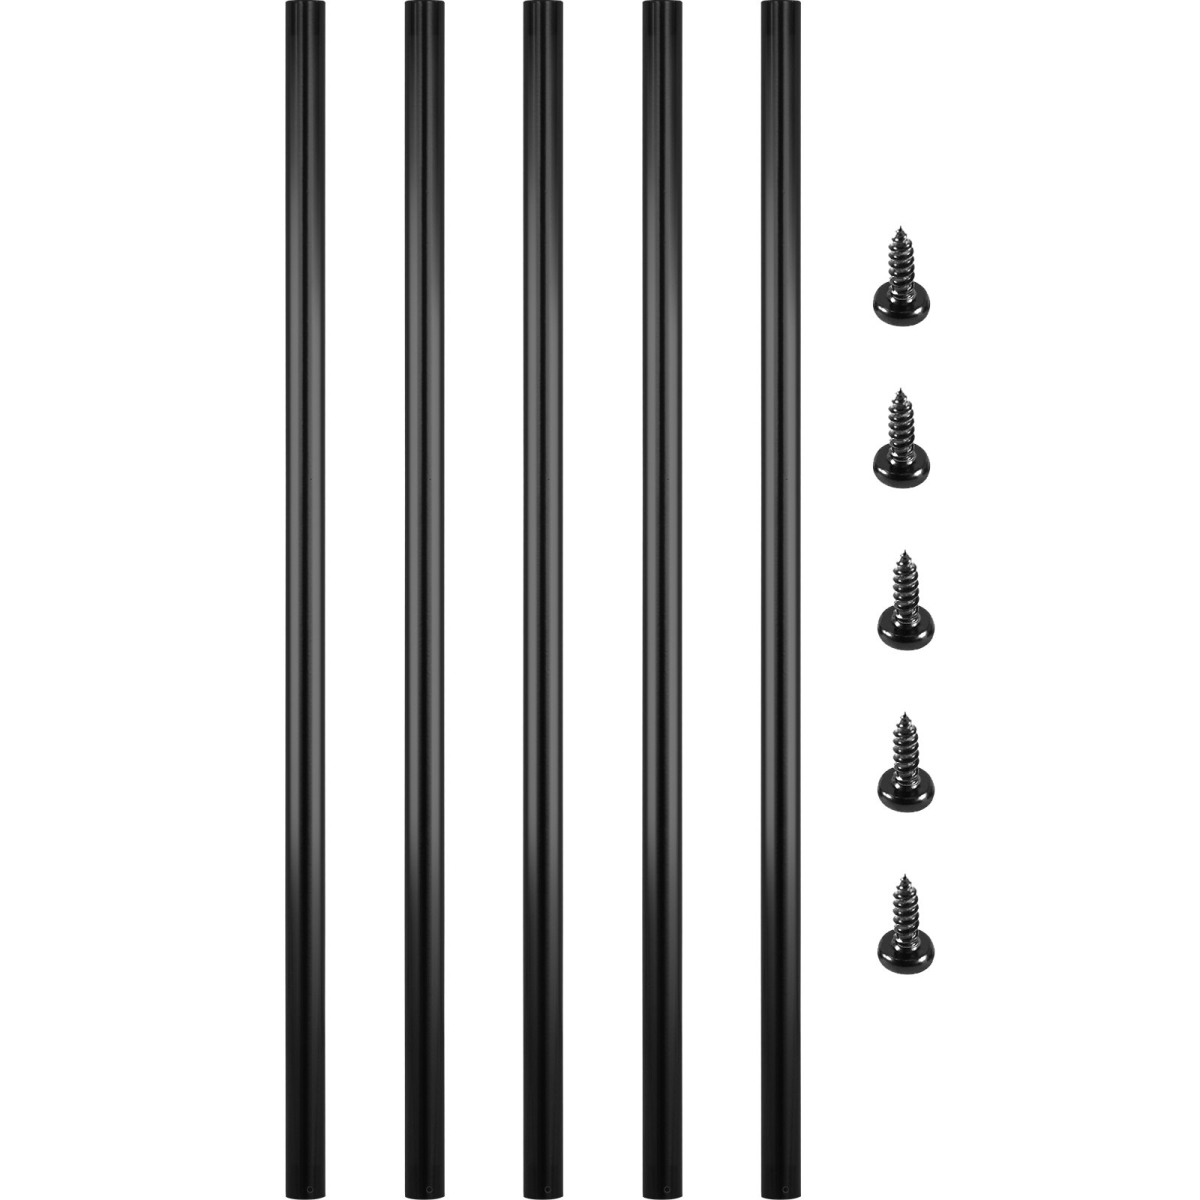 Picture of Vevor HJLGCYXB3250-UEGFV0 32 x 0.75 in. Staircase Baluster with Screws - Pack of 51